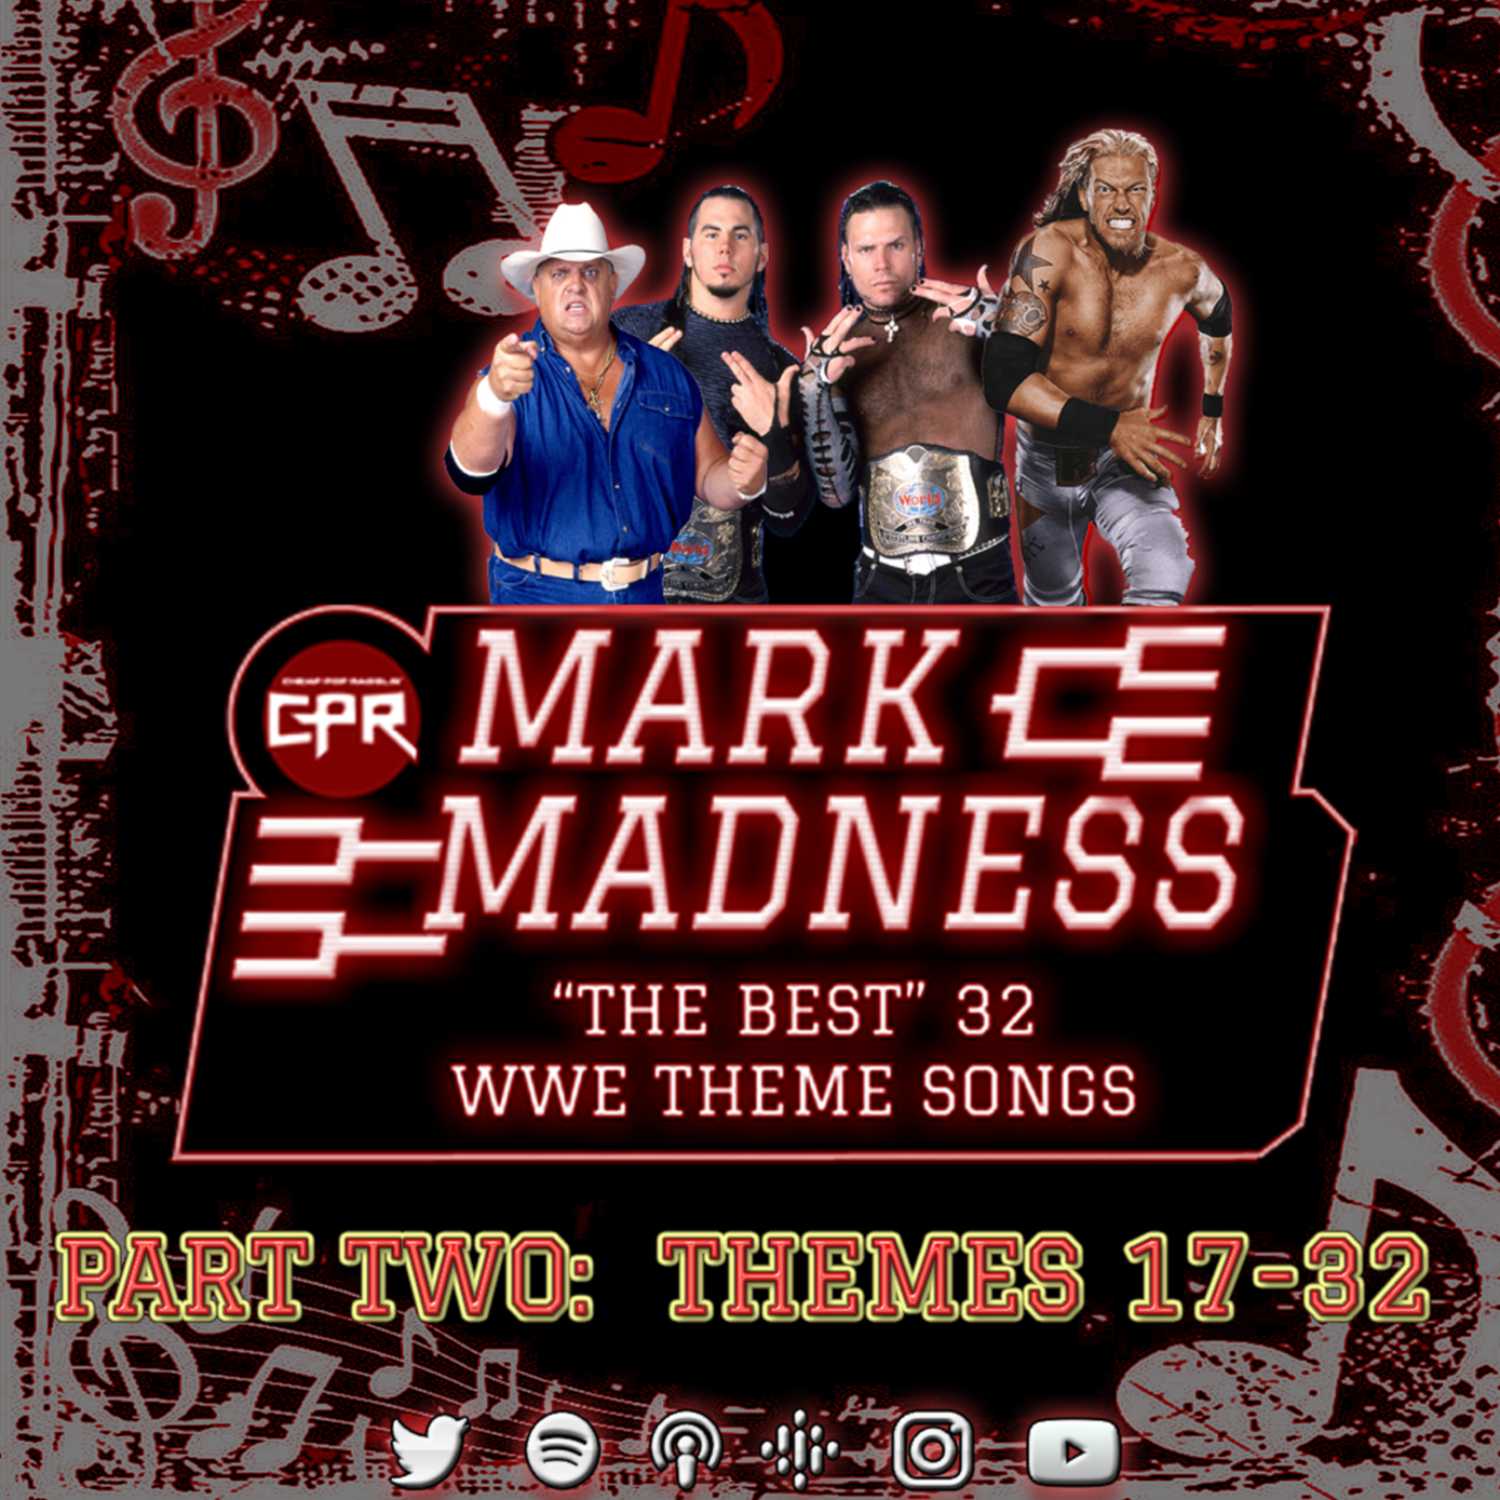 (Part 2 of 3) Mark Madness: "The Best" WWE Theme Songs